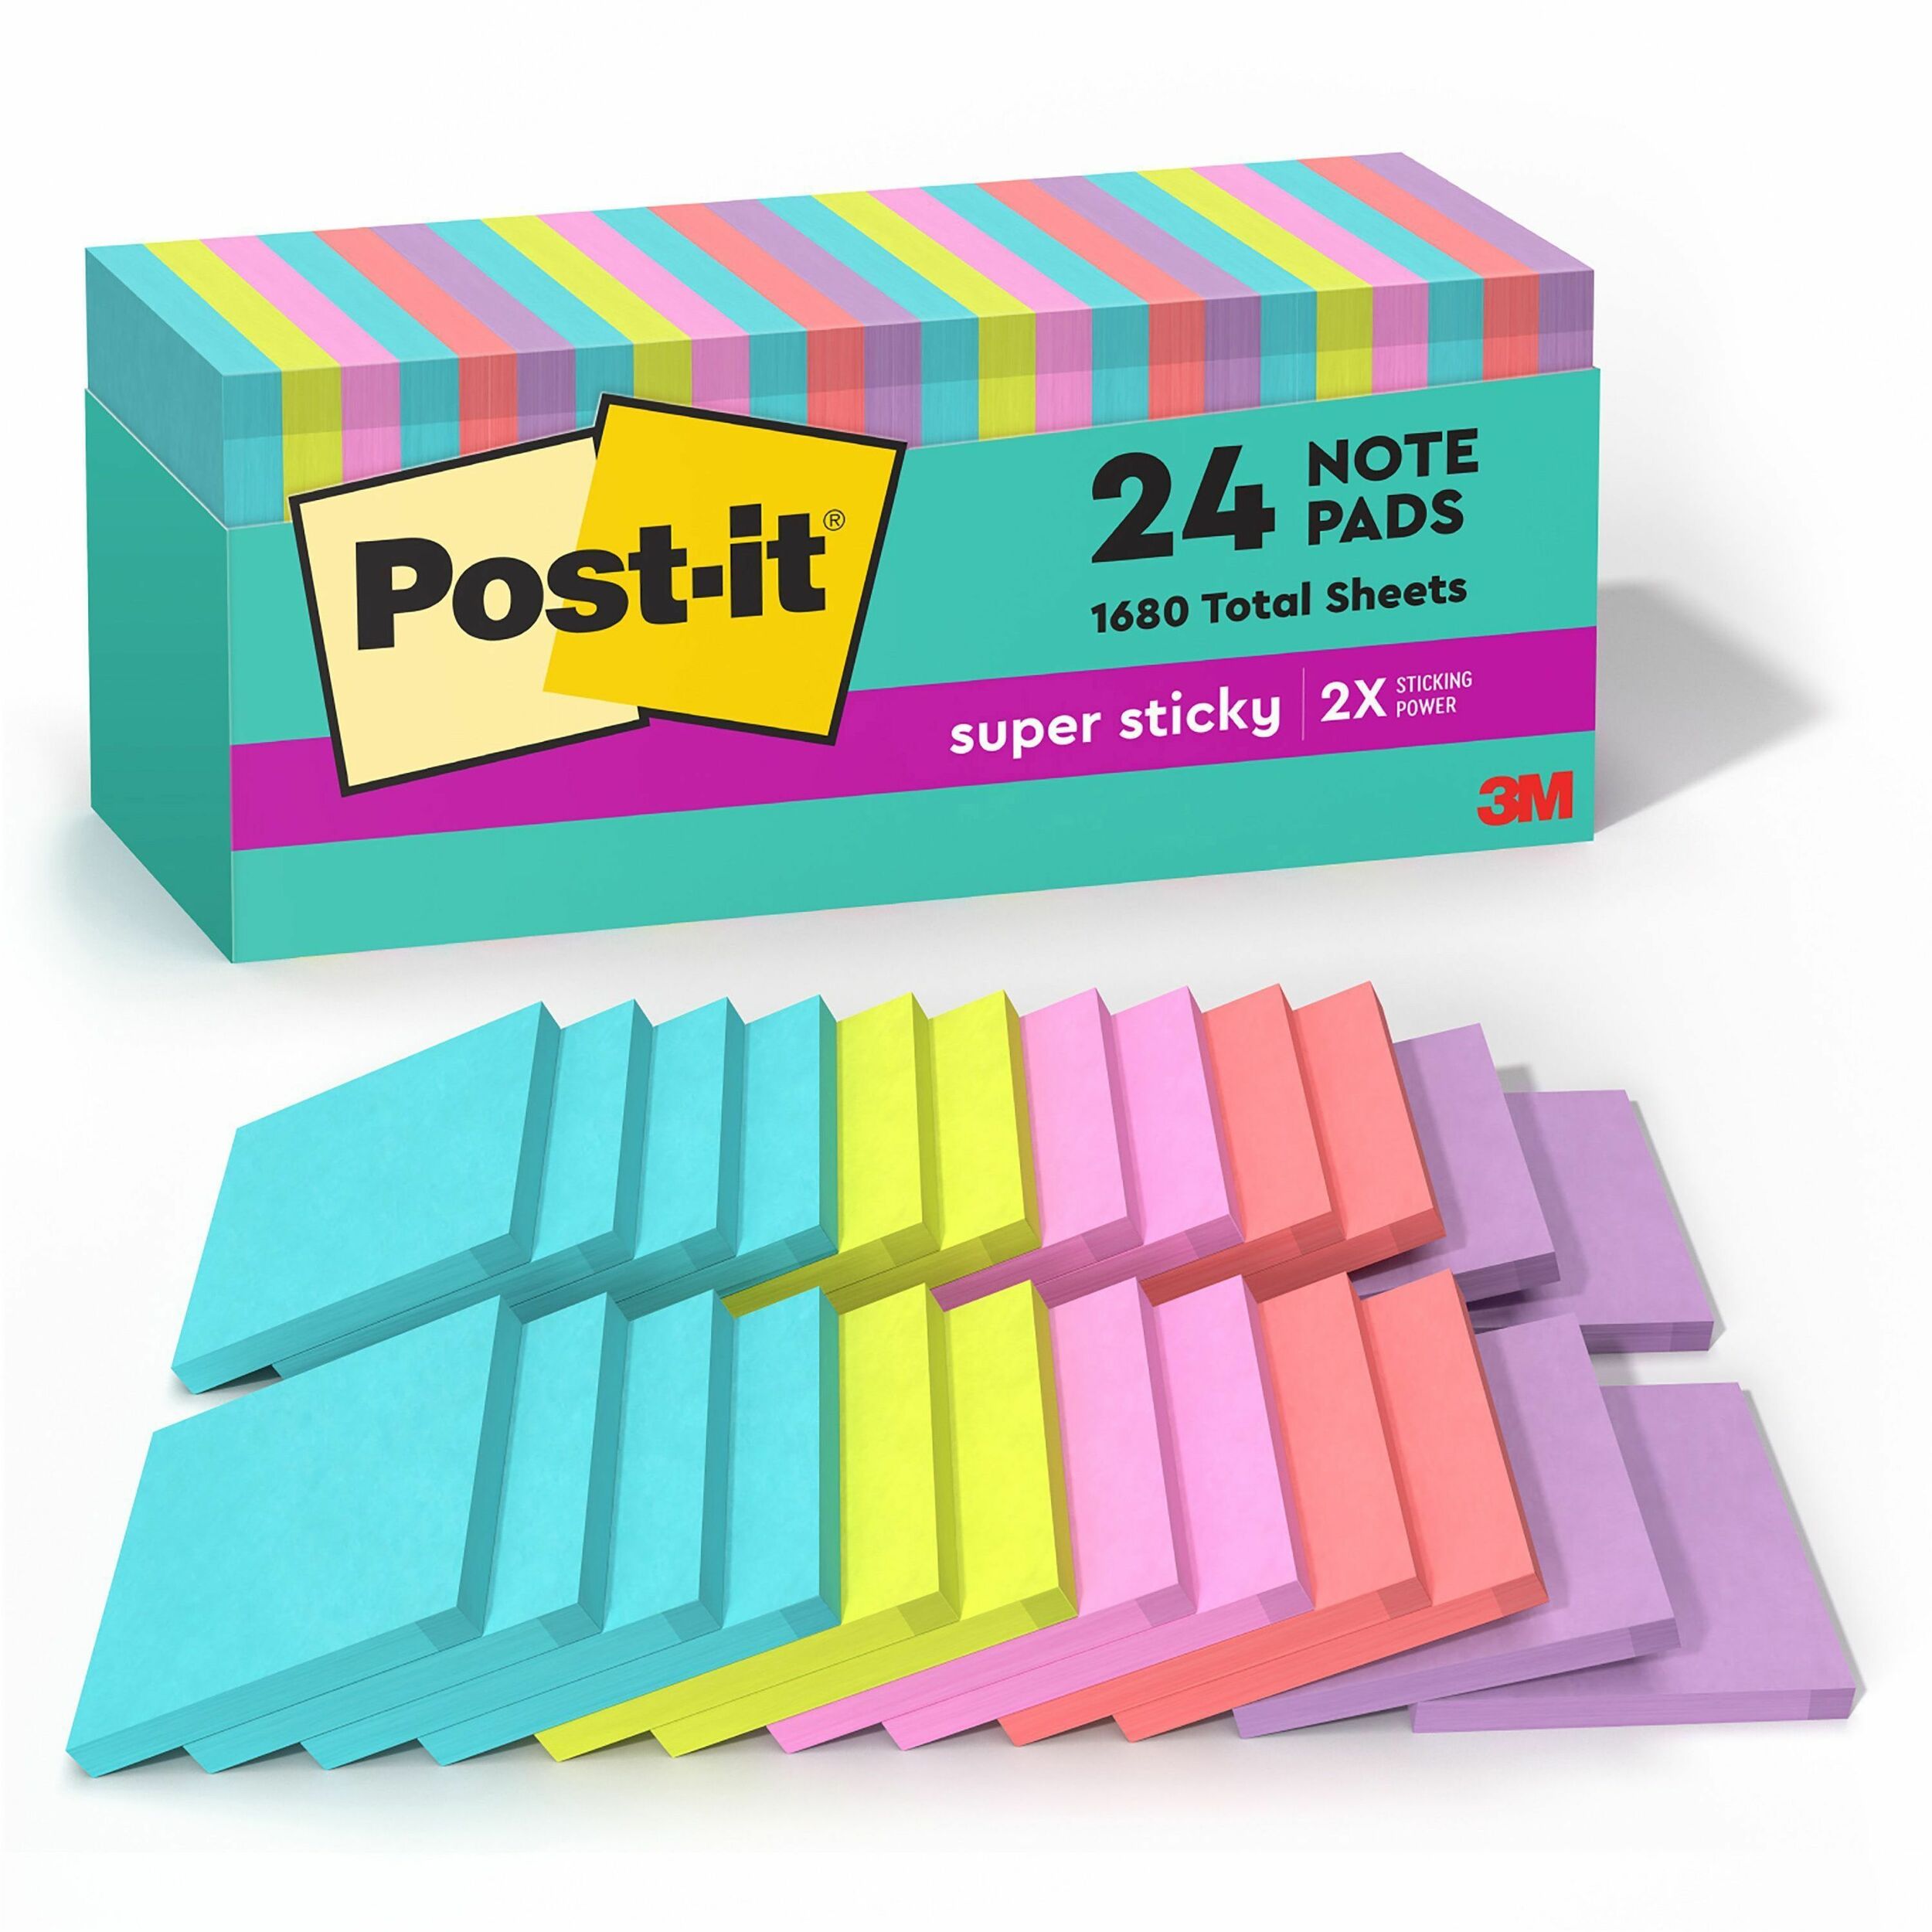 Printing on Post-It Notes • Sweet Sensations